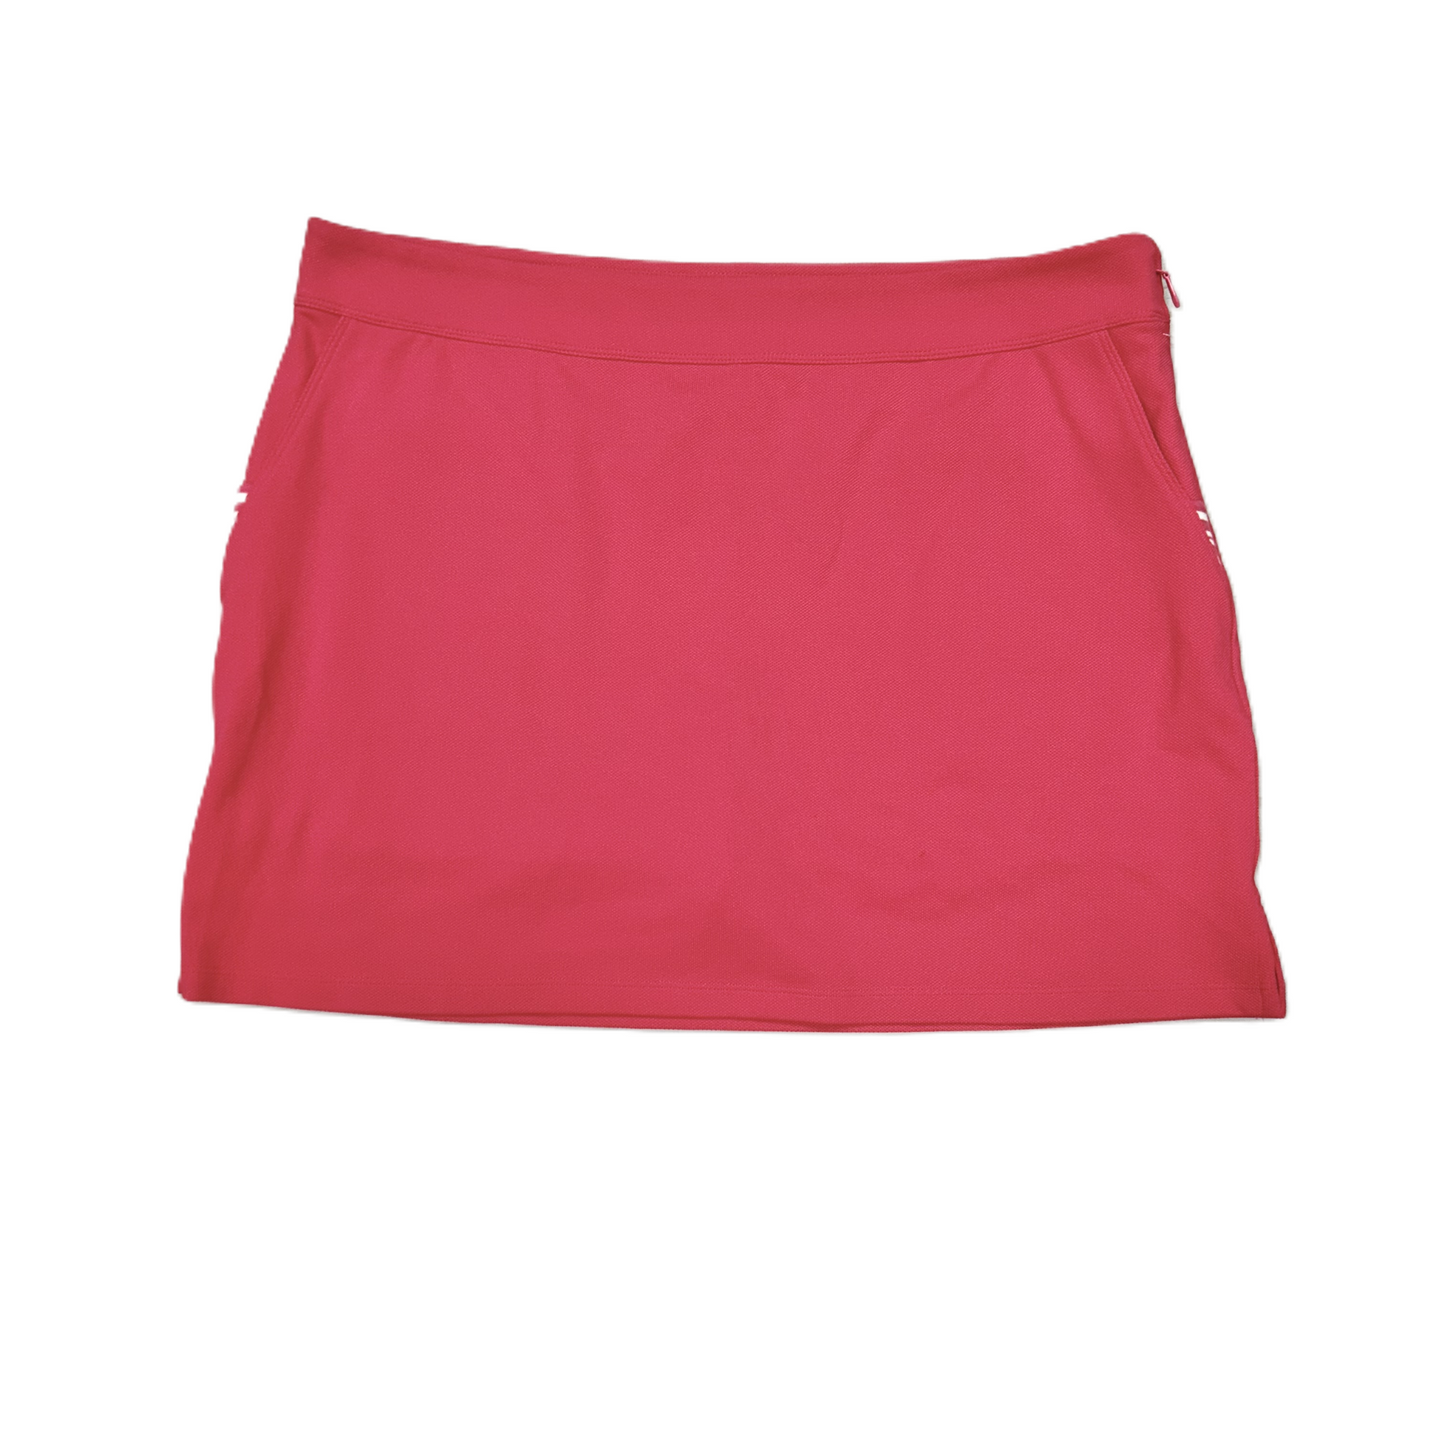 Pink Athletic Skirt By Vineyard Vines, Size: Xl